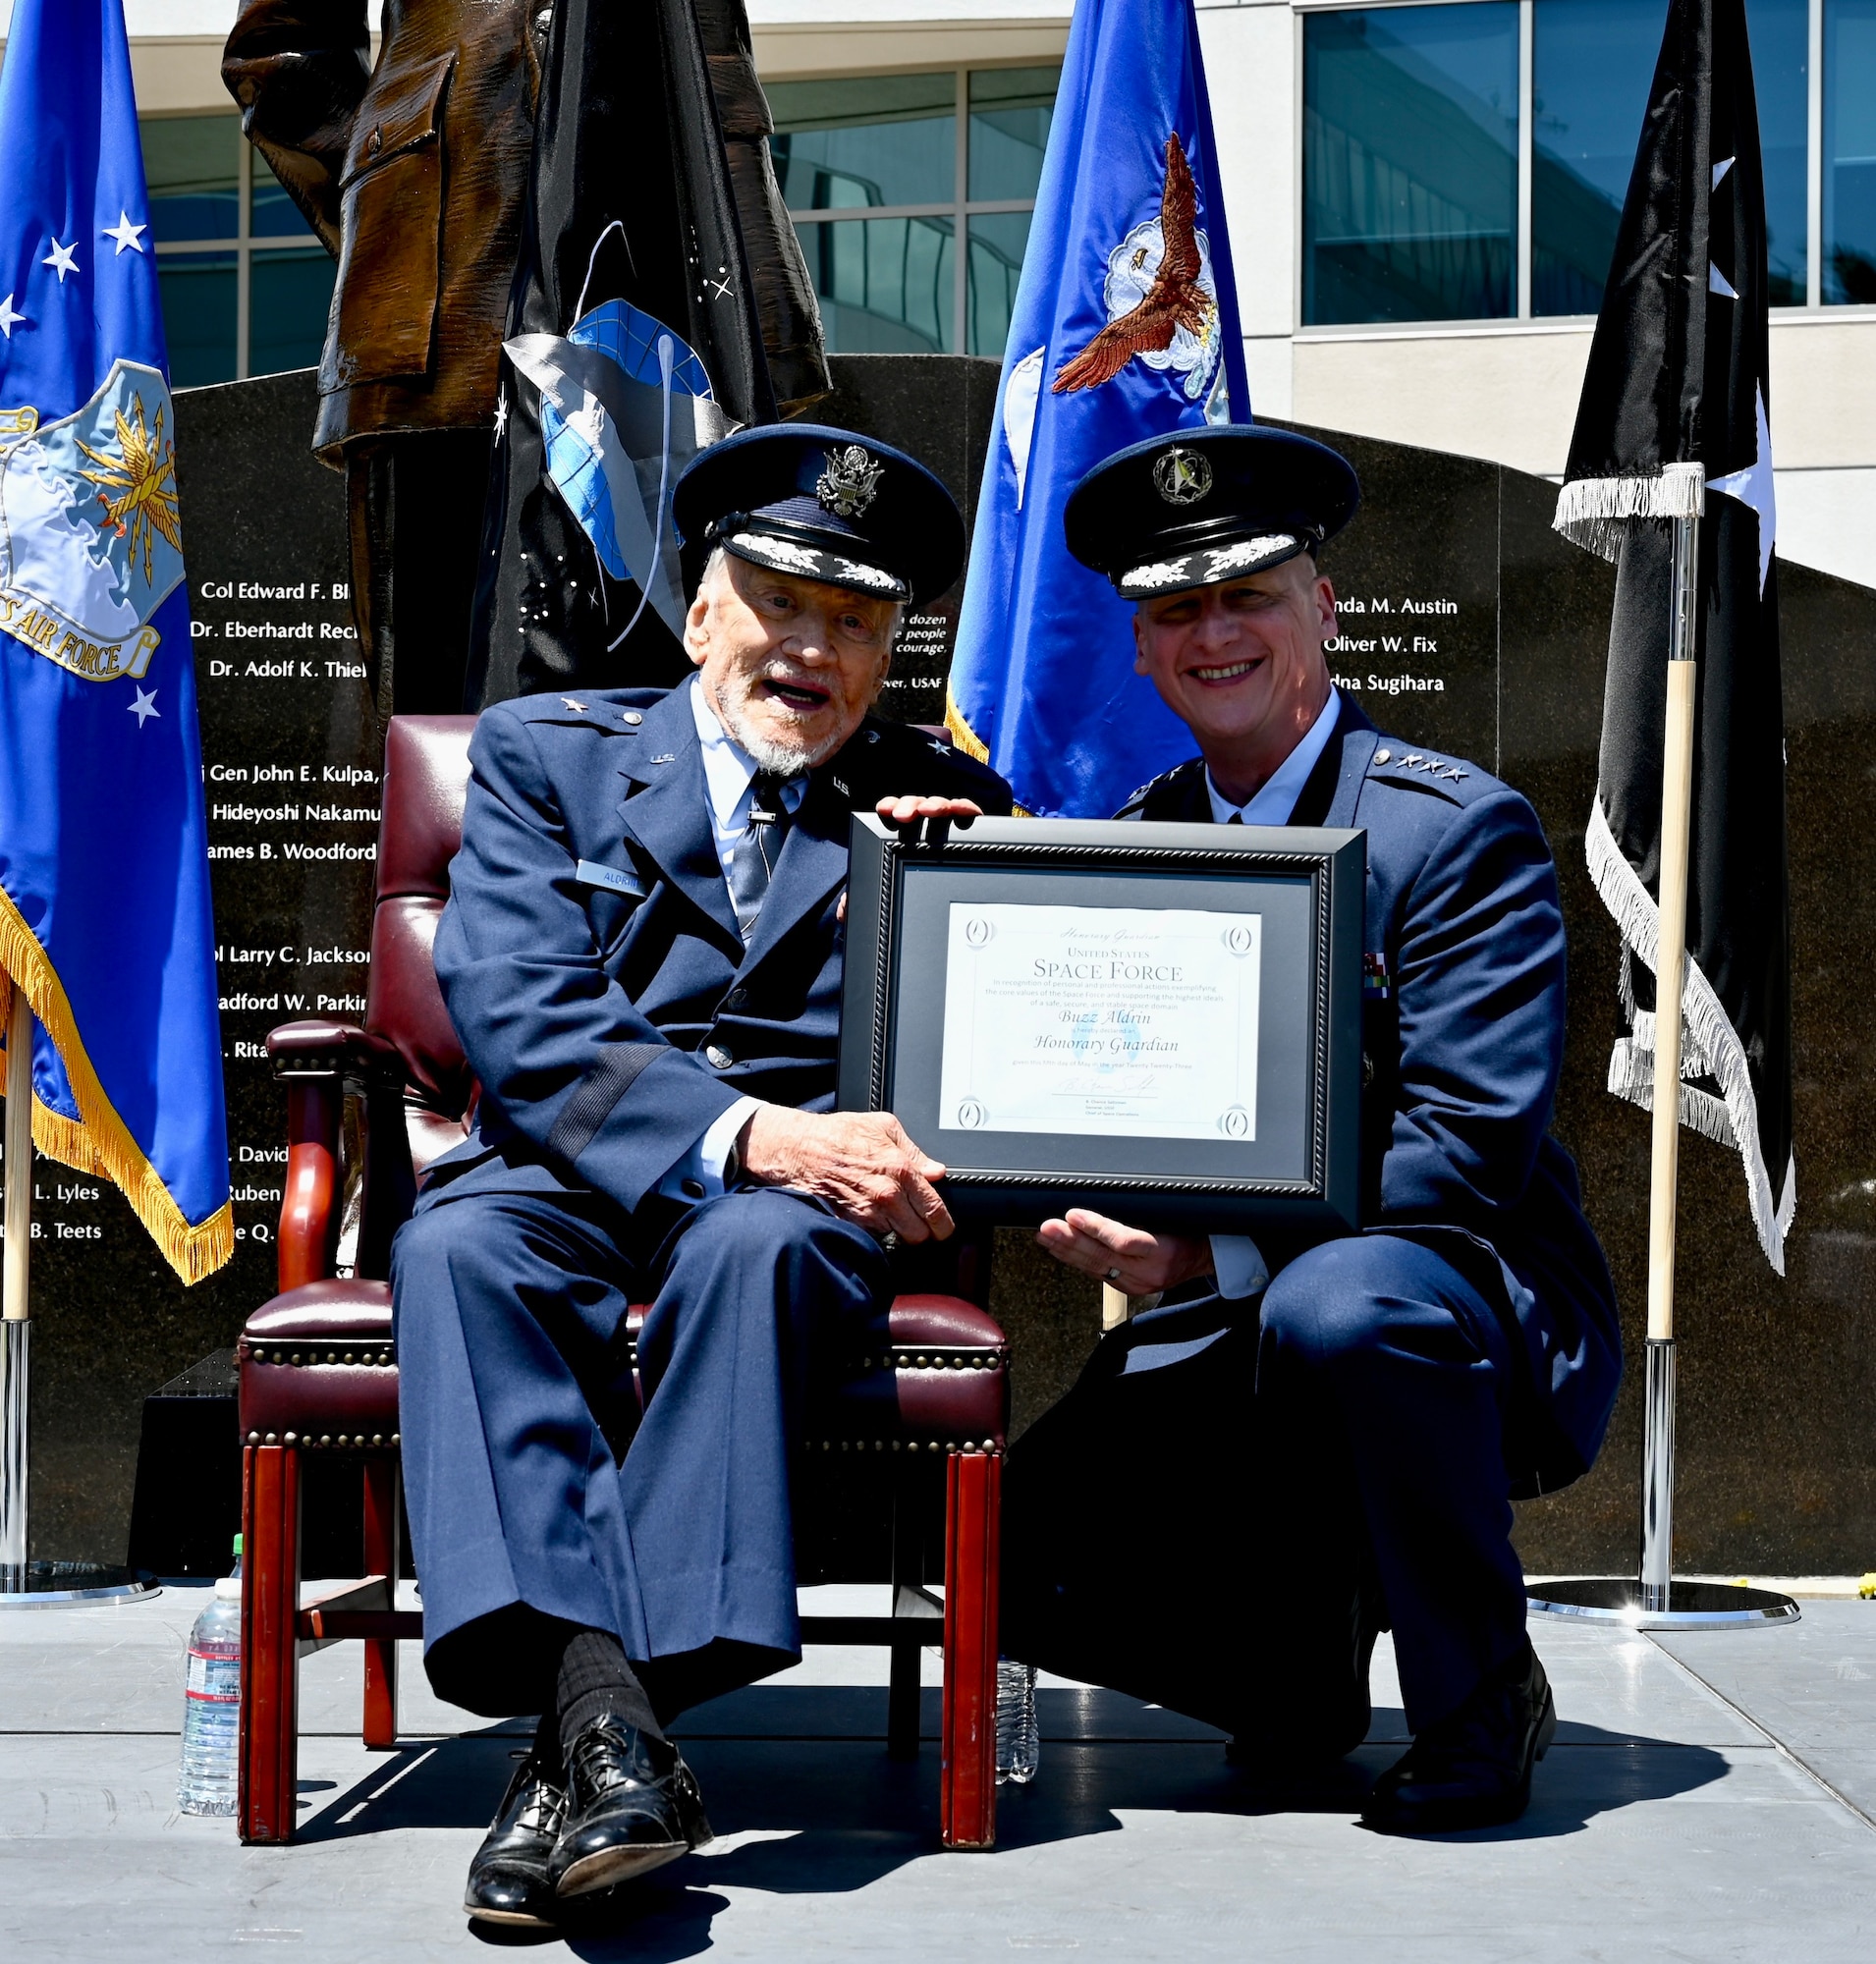 Space Force Lt. Gen. Michael Guetlein, Space Systems Commander (right) presents the Honorary Guardian certificate to retired Air Force Brig. Gen. Buzz Aldrin (left) during his promotion ceremony at Space Systems Command on May 5, 2023. “In addition to being promoted to a one-star in the Air Force, Brig. Gen. Aldrin is being made on Honorary Space Force Guardian,” stated Guetlein. “He has lived a life epitomizing the Space Force Guardian values of character, connection, commitment, and courage.” (U.S. Space Force photo by Lt. Katelin Robinson)